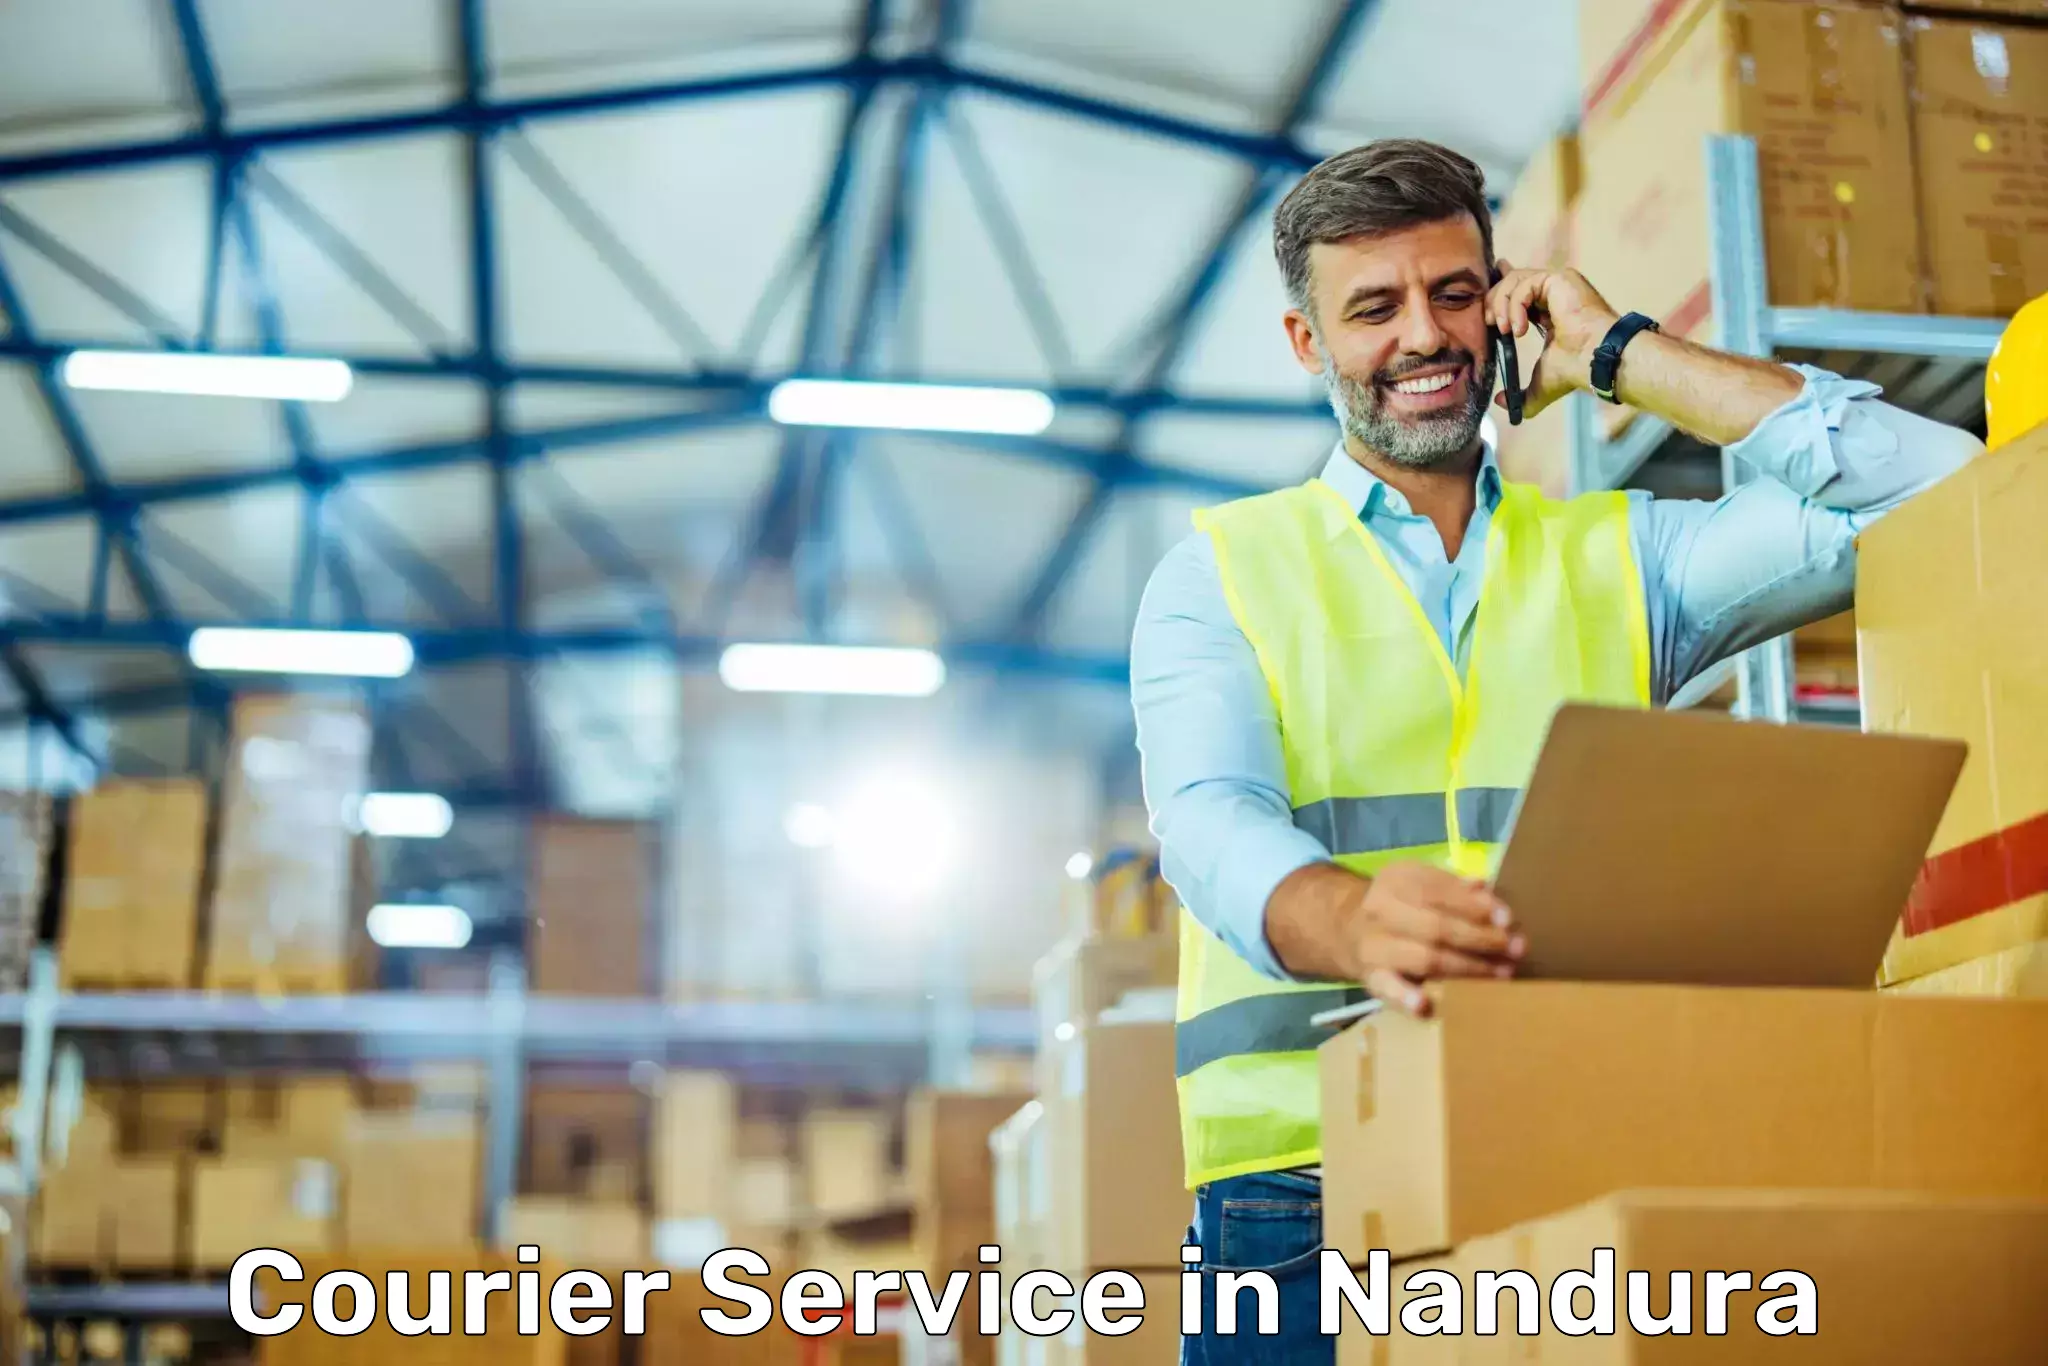 Cost-effective freight solutions in Nandura